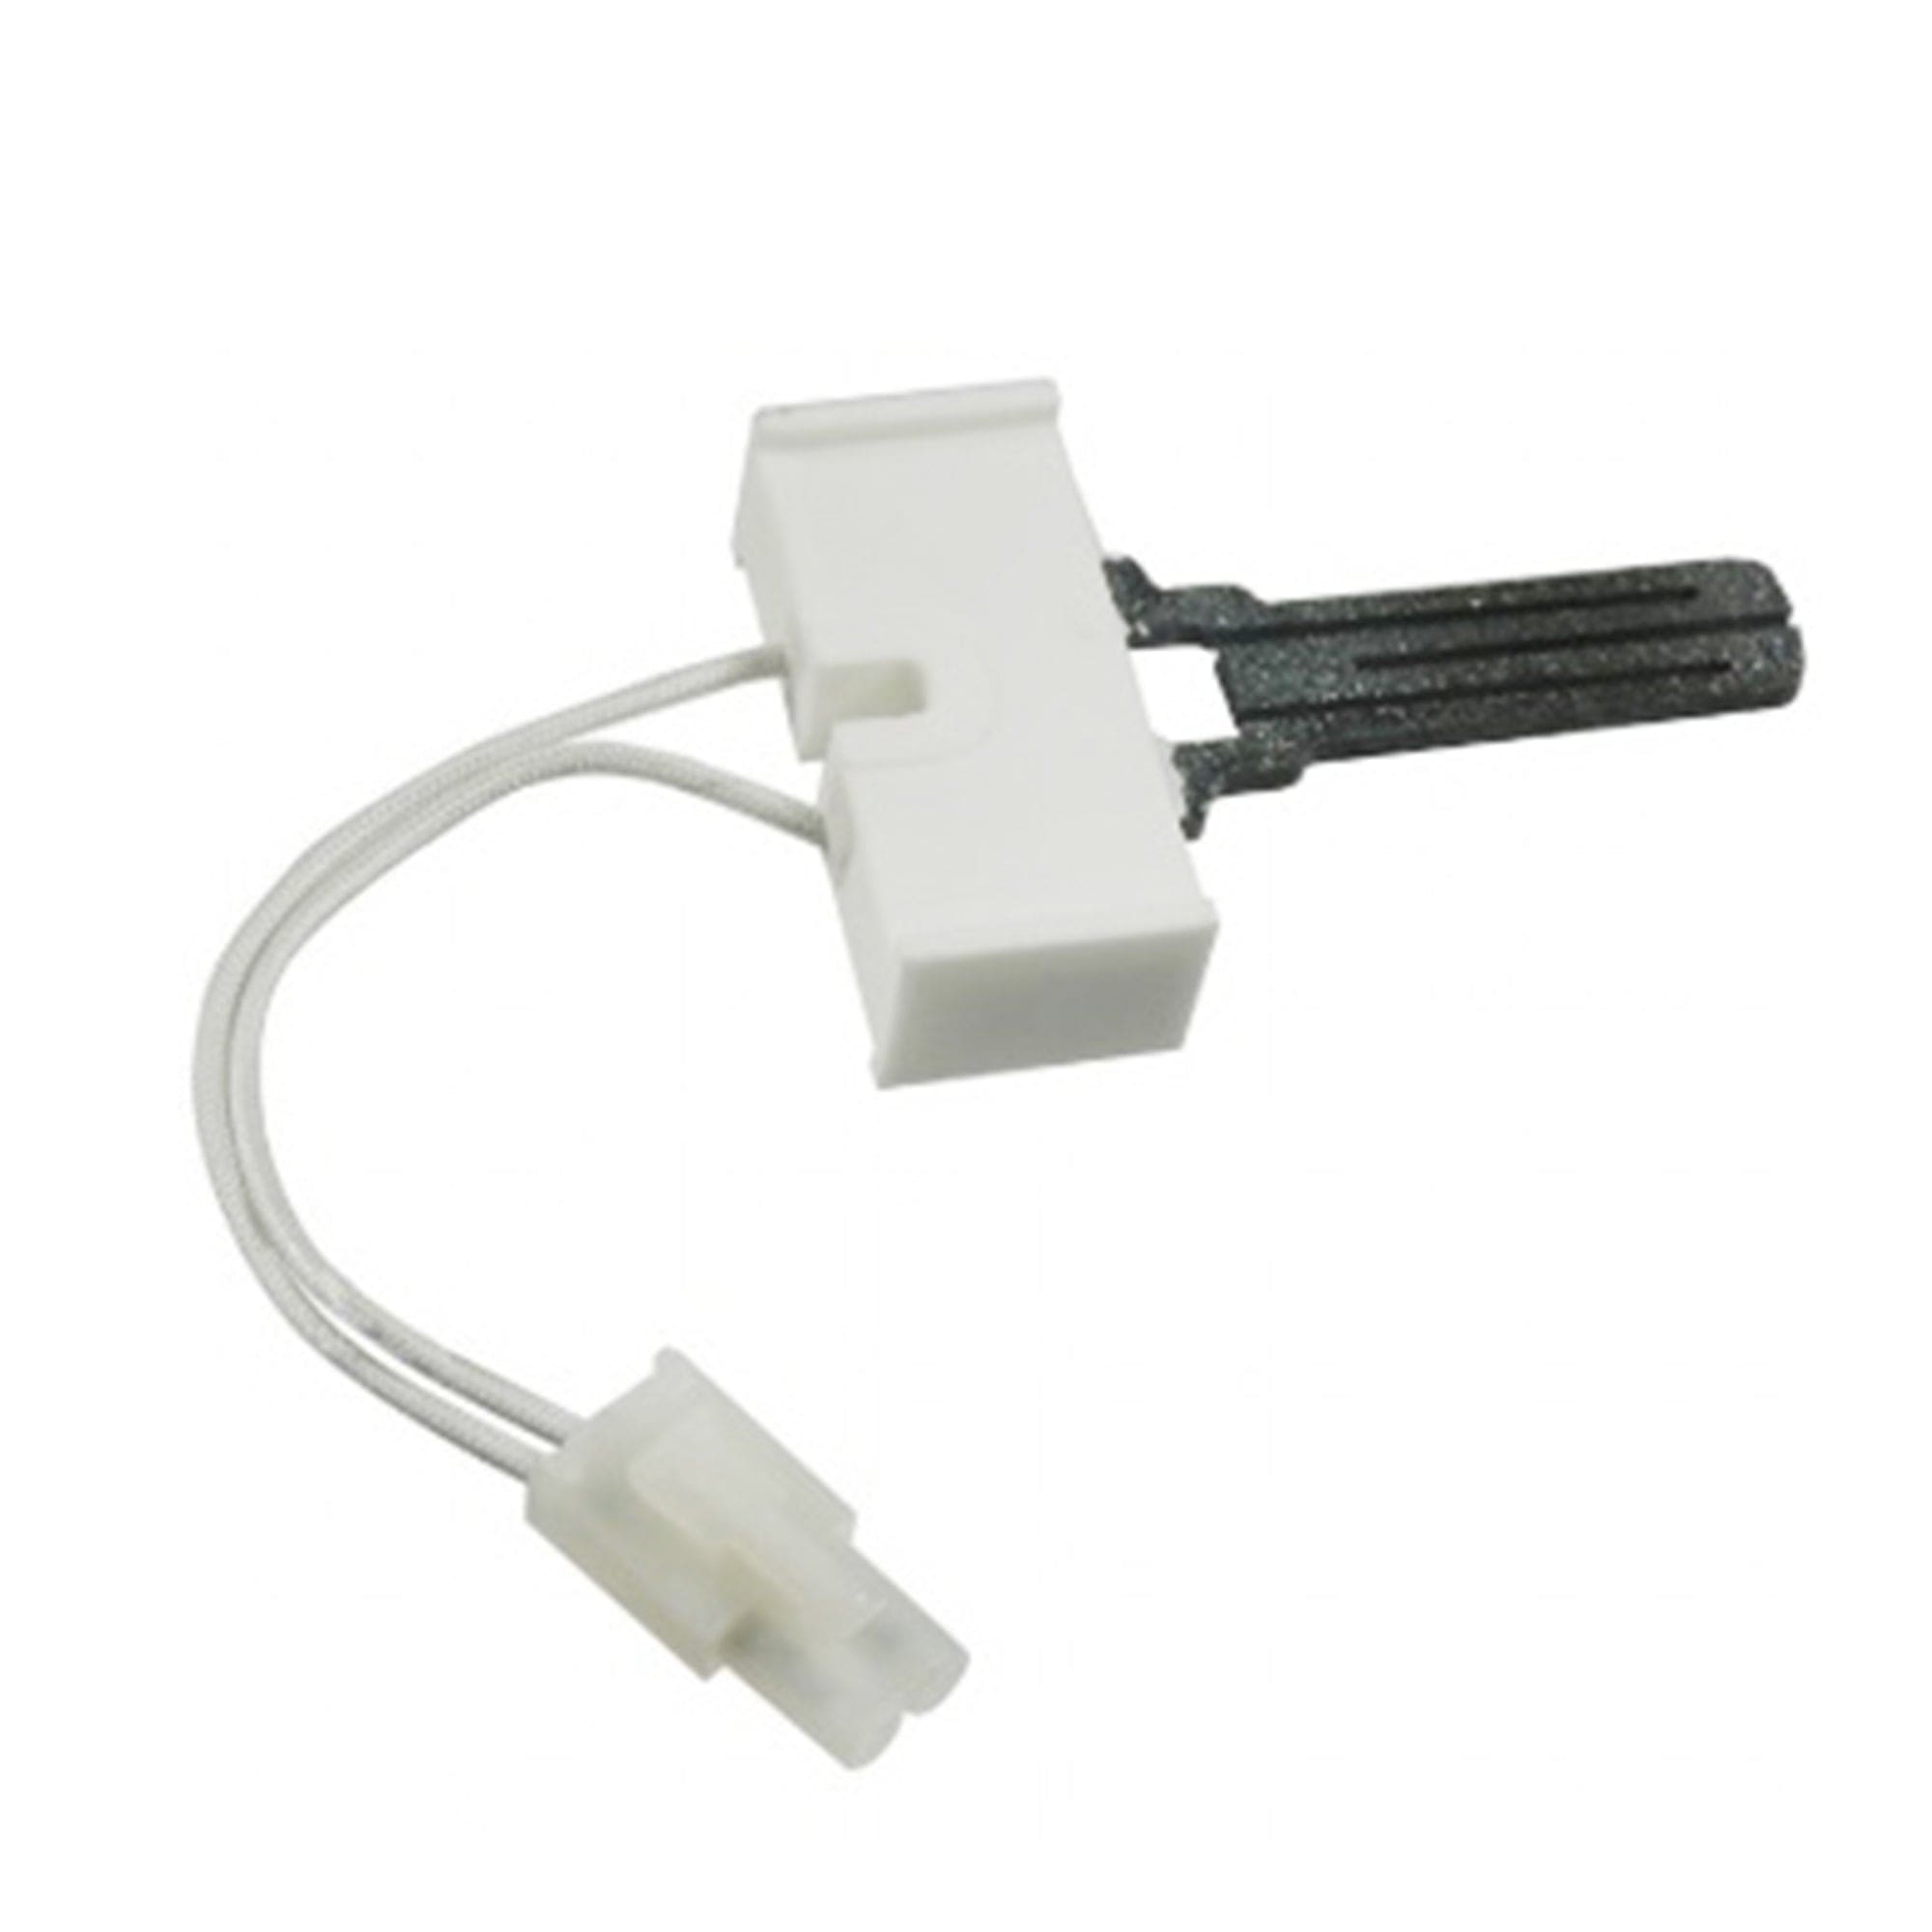 Packard IG1407 Flat Silicon Carbide Igniter